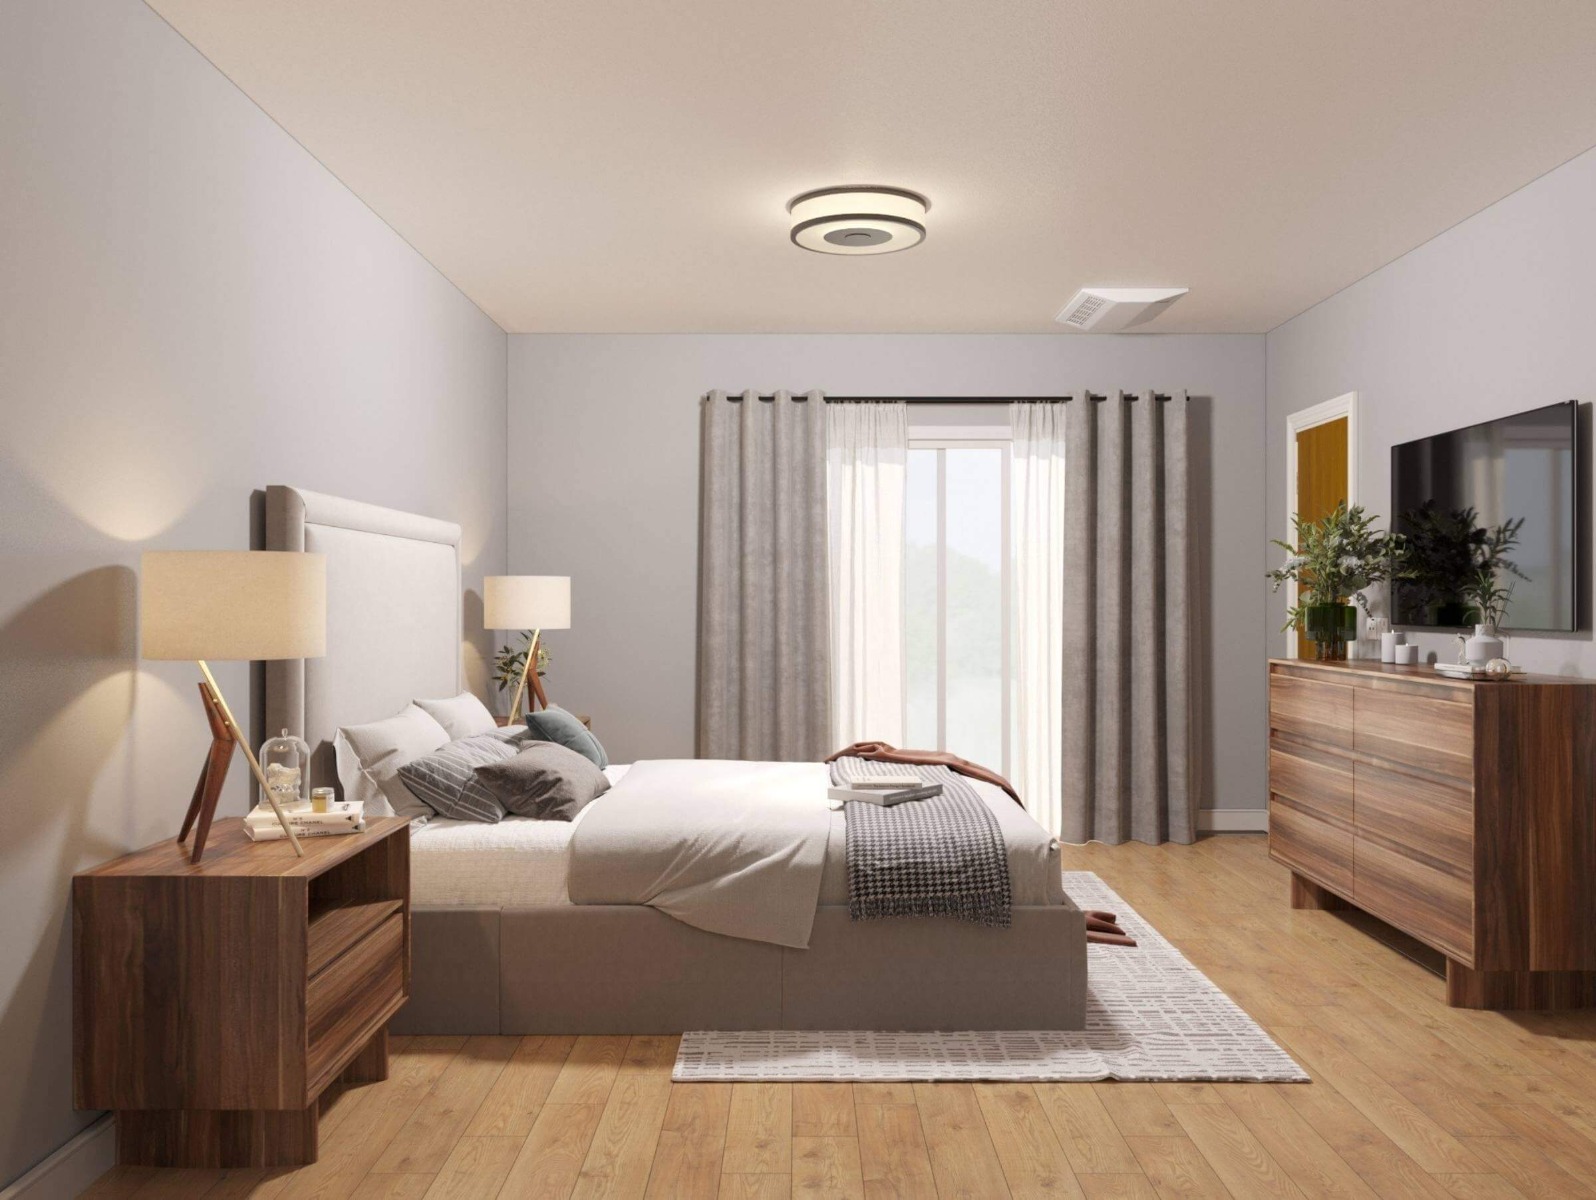 hestya-online-interior-design-with-an-affordable-bedroom-1